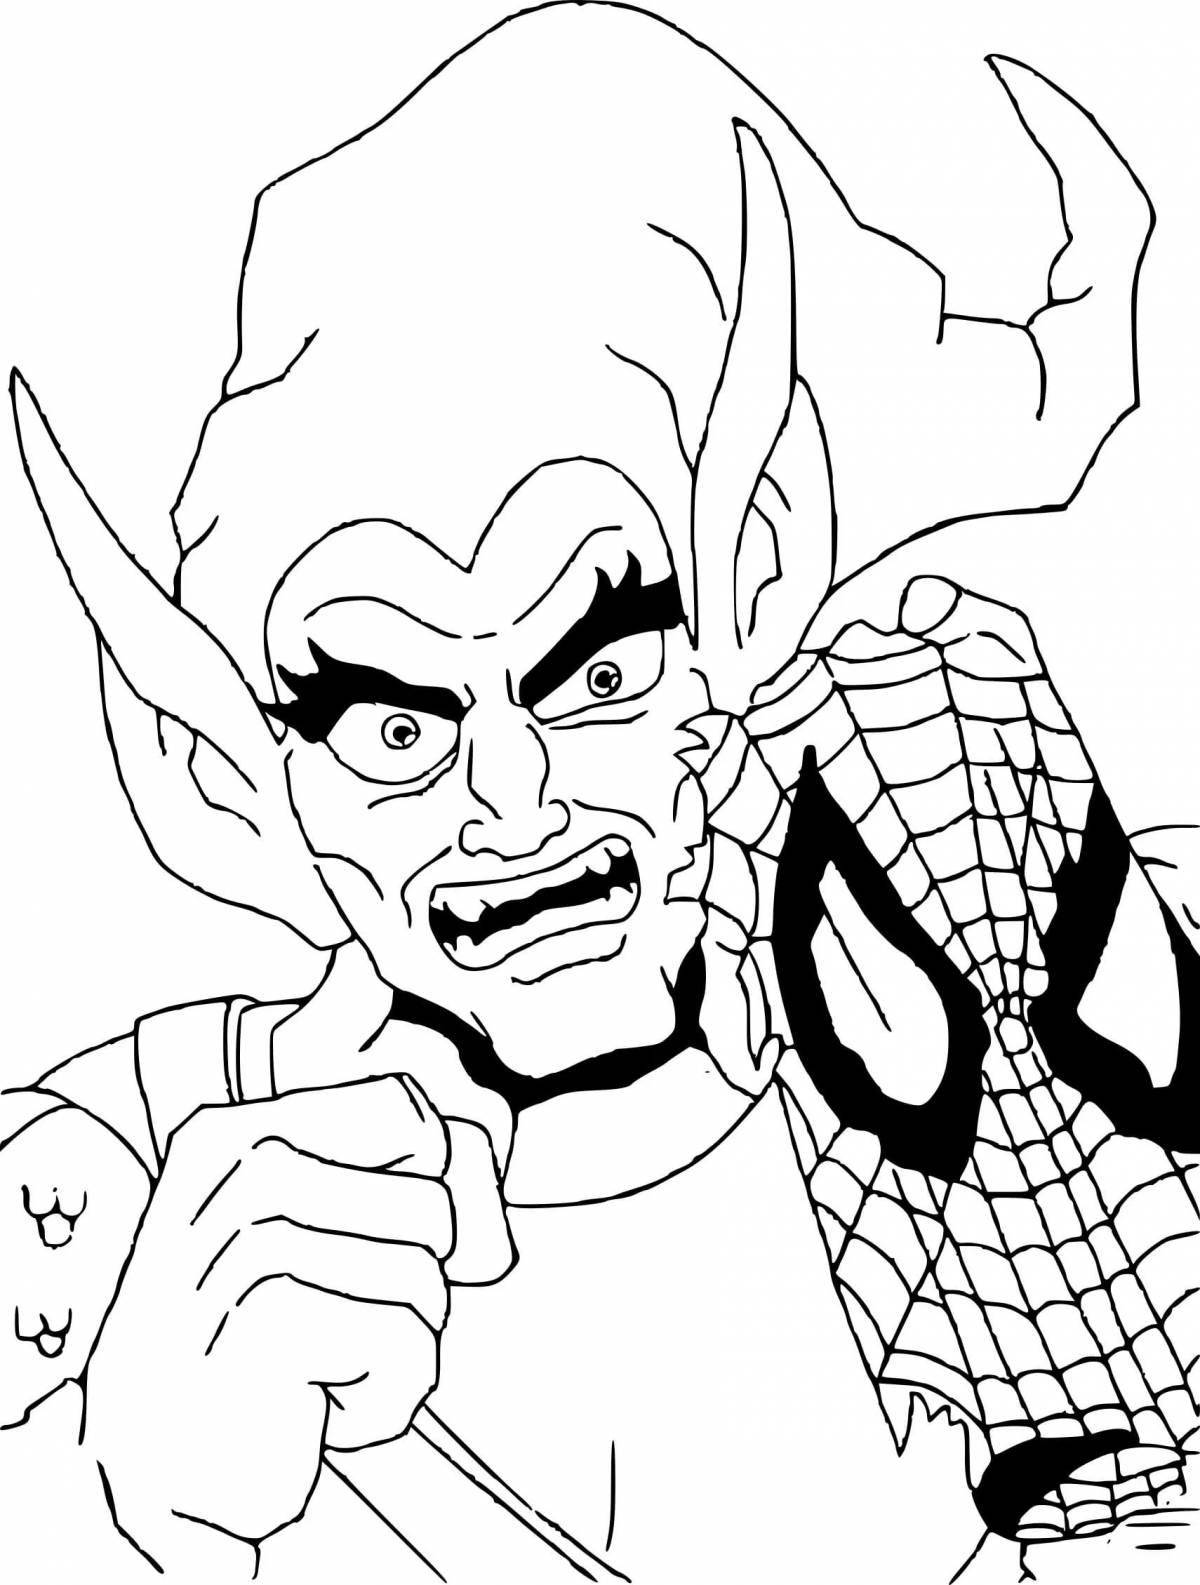 Sinister supervillain coloring book